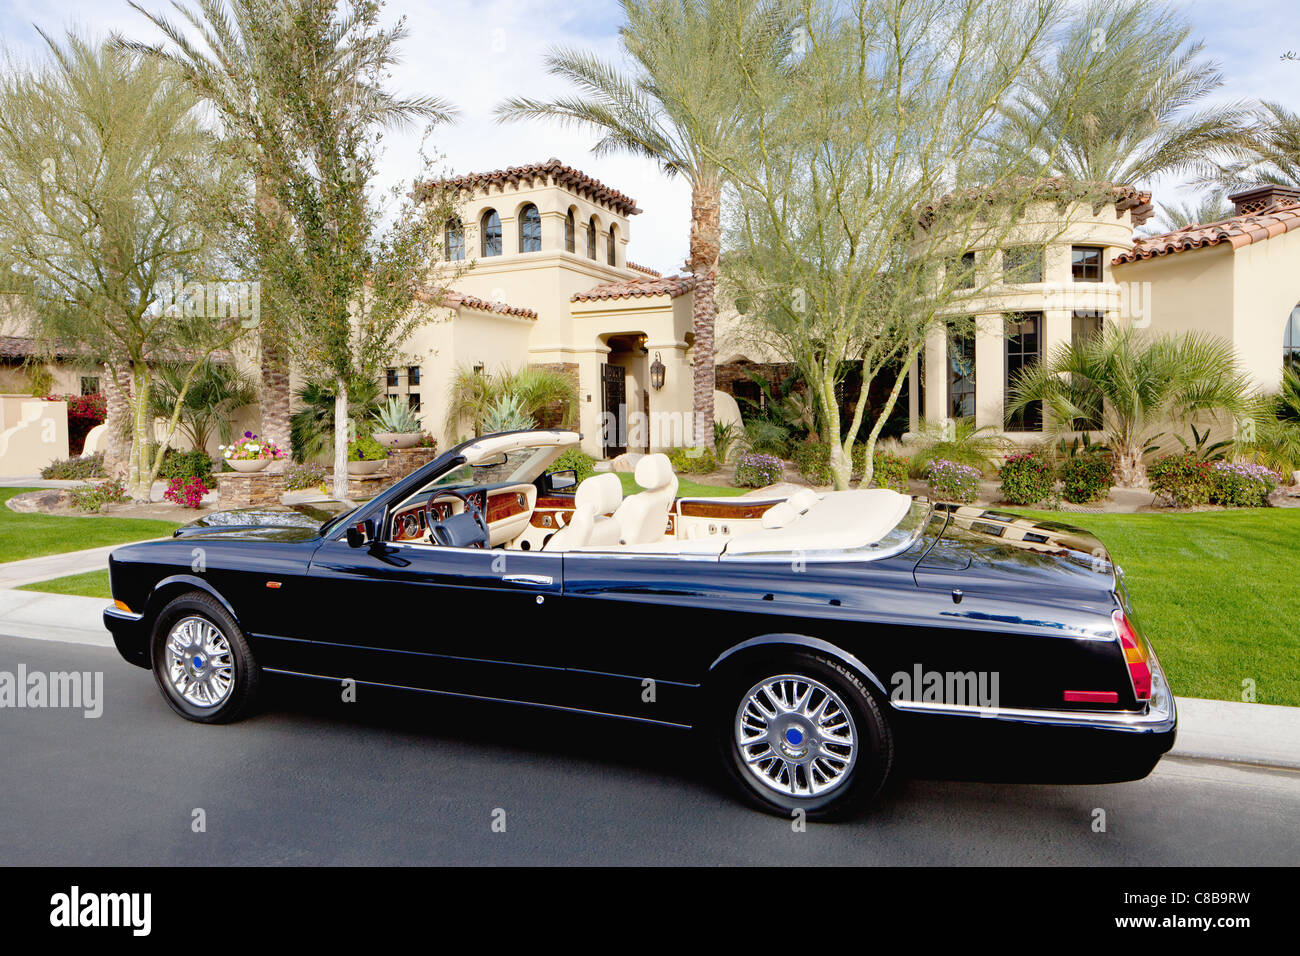 Black convertible car parked in front f luxury house Stock Photo